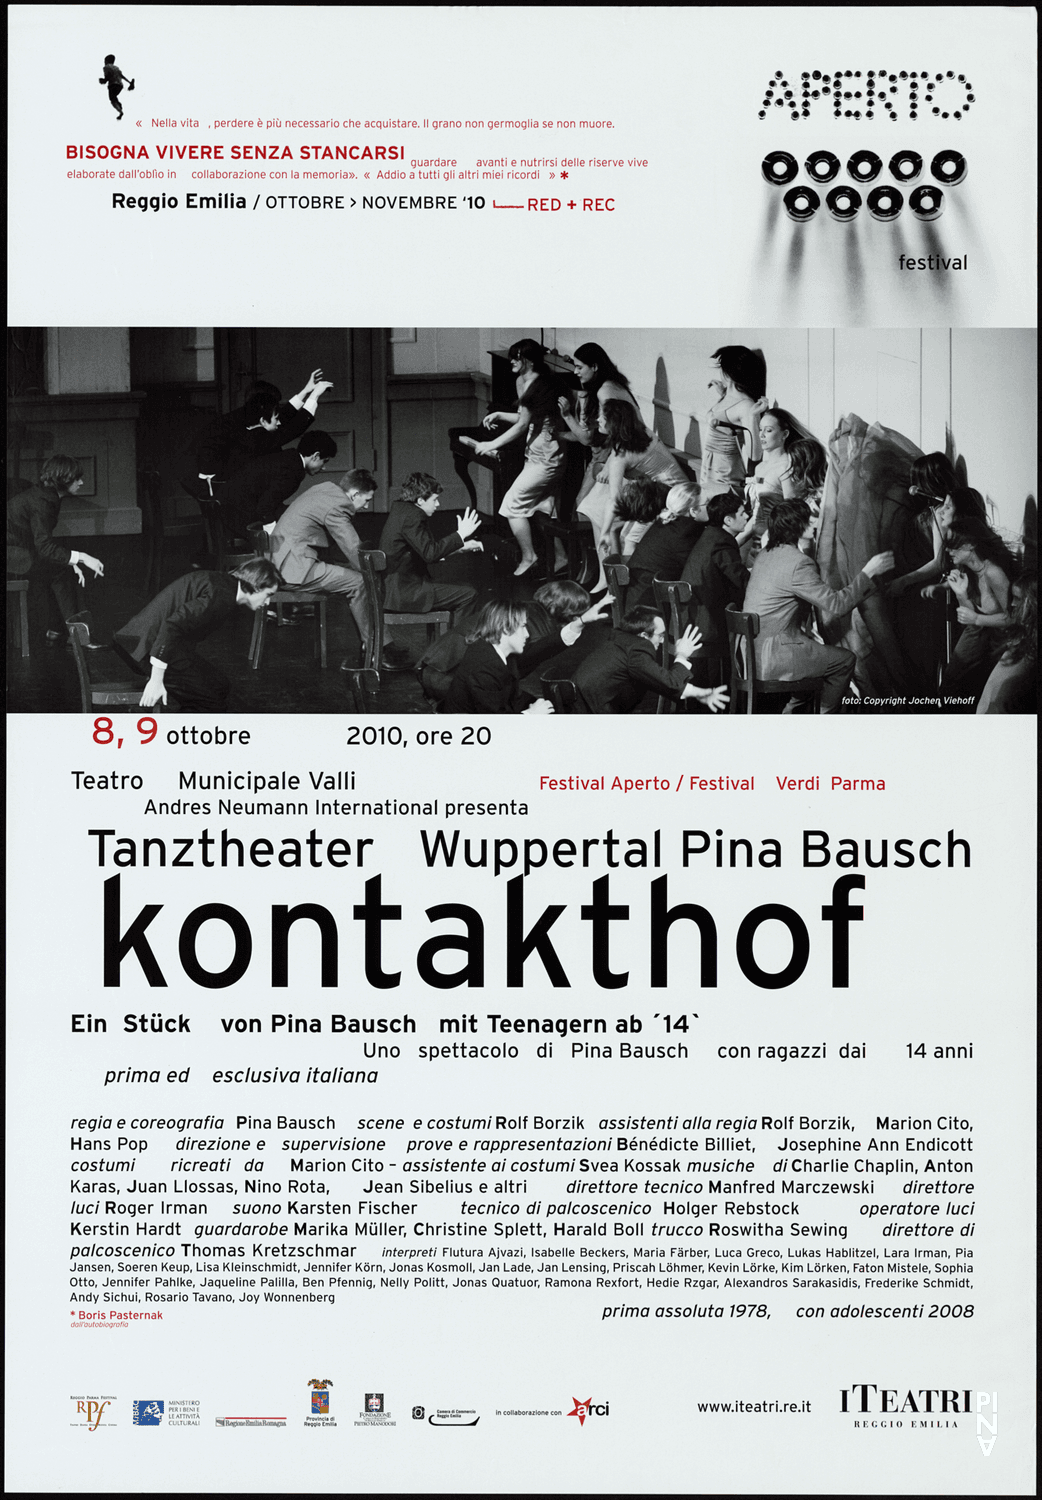 Poster for “Kontakthof. With Teenagers over 14” by Pina Bausch in Reggio nell'Emilia, 10/08/2010 – 10/09/2010